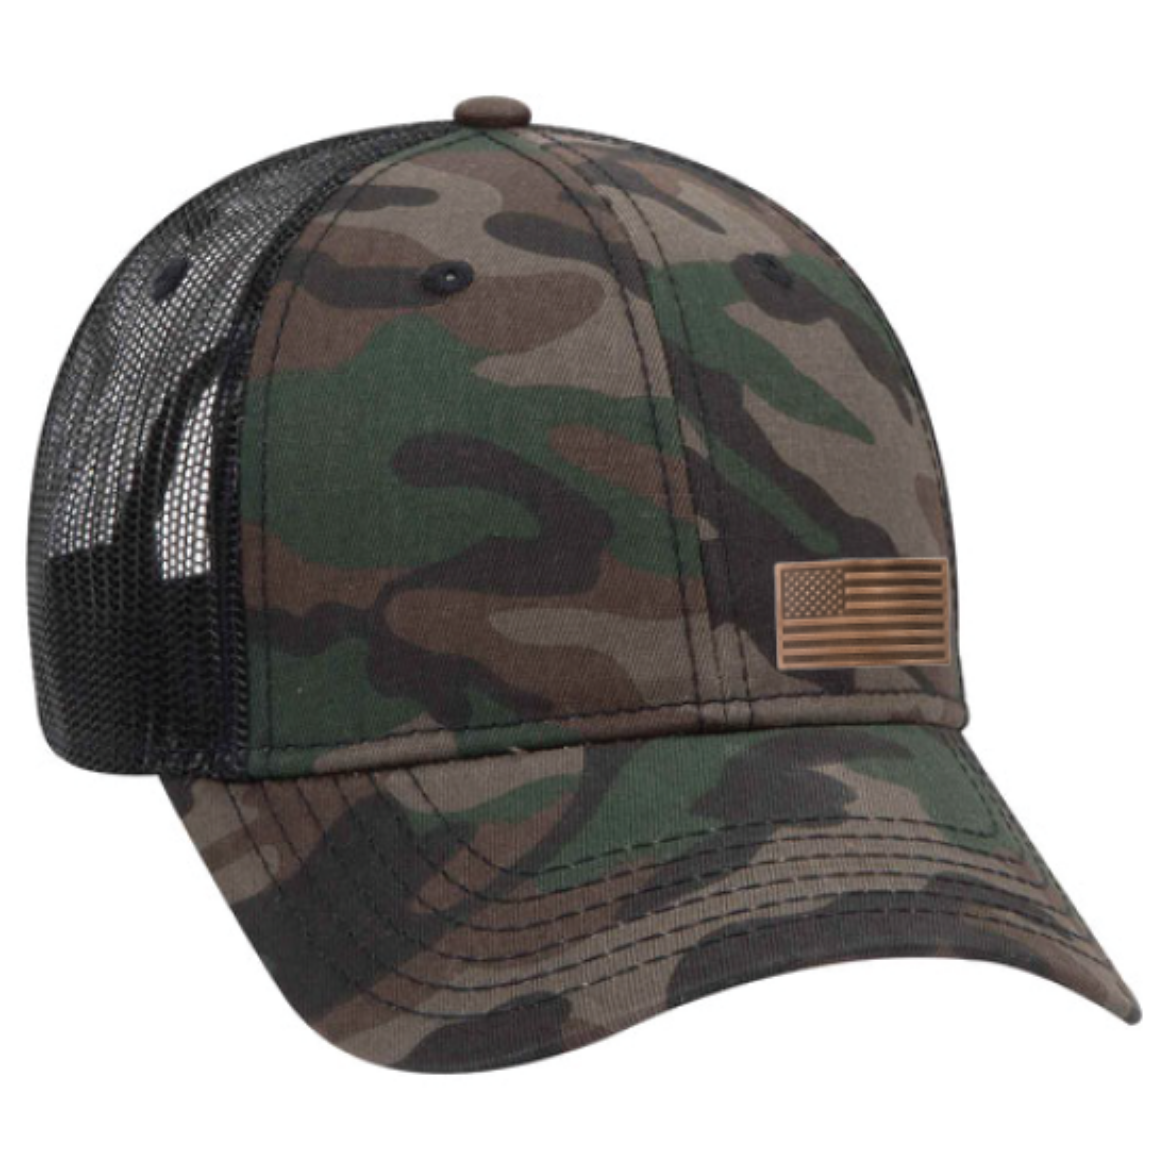 Picture of Camo/Black Mesh Hat w/ Leather Flag Patch